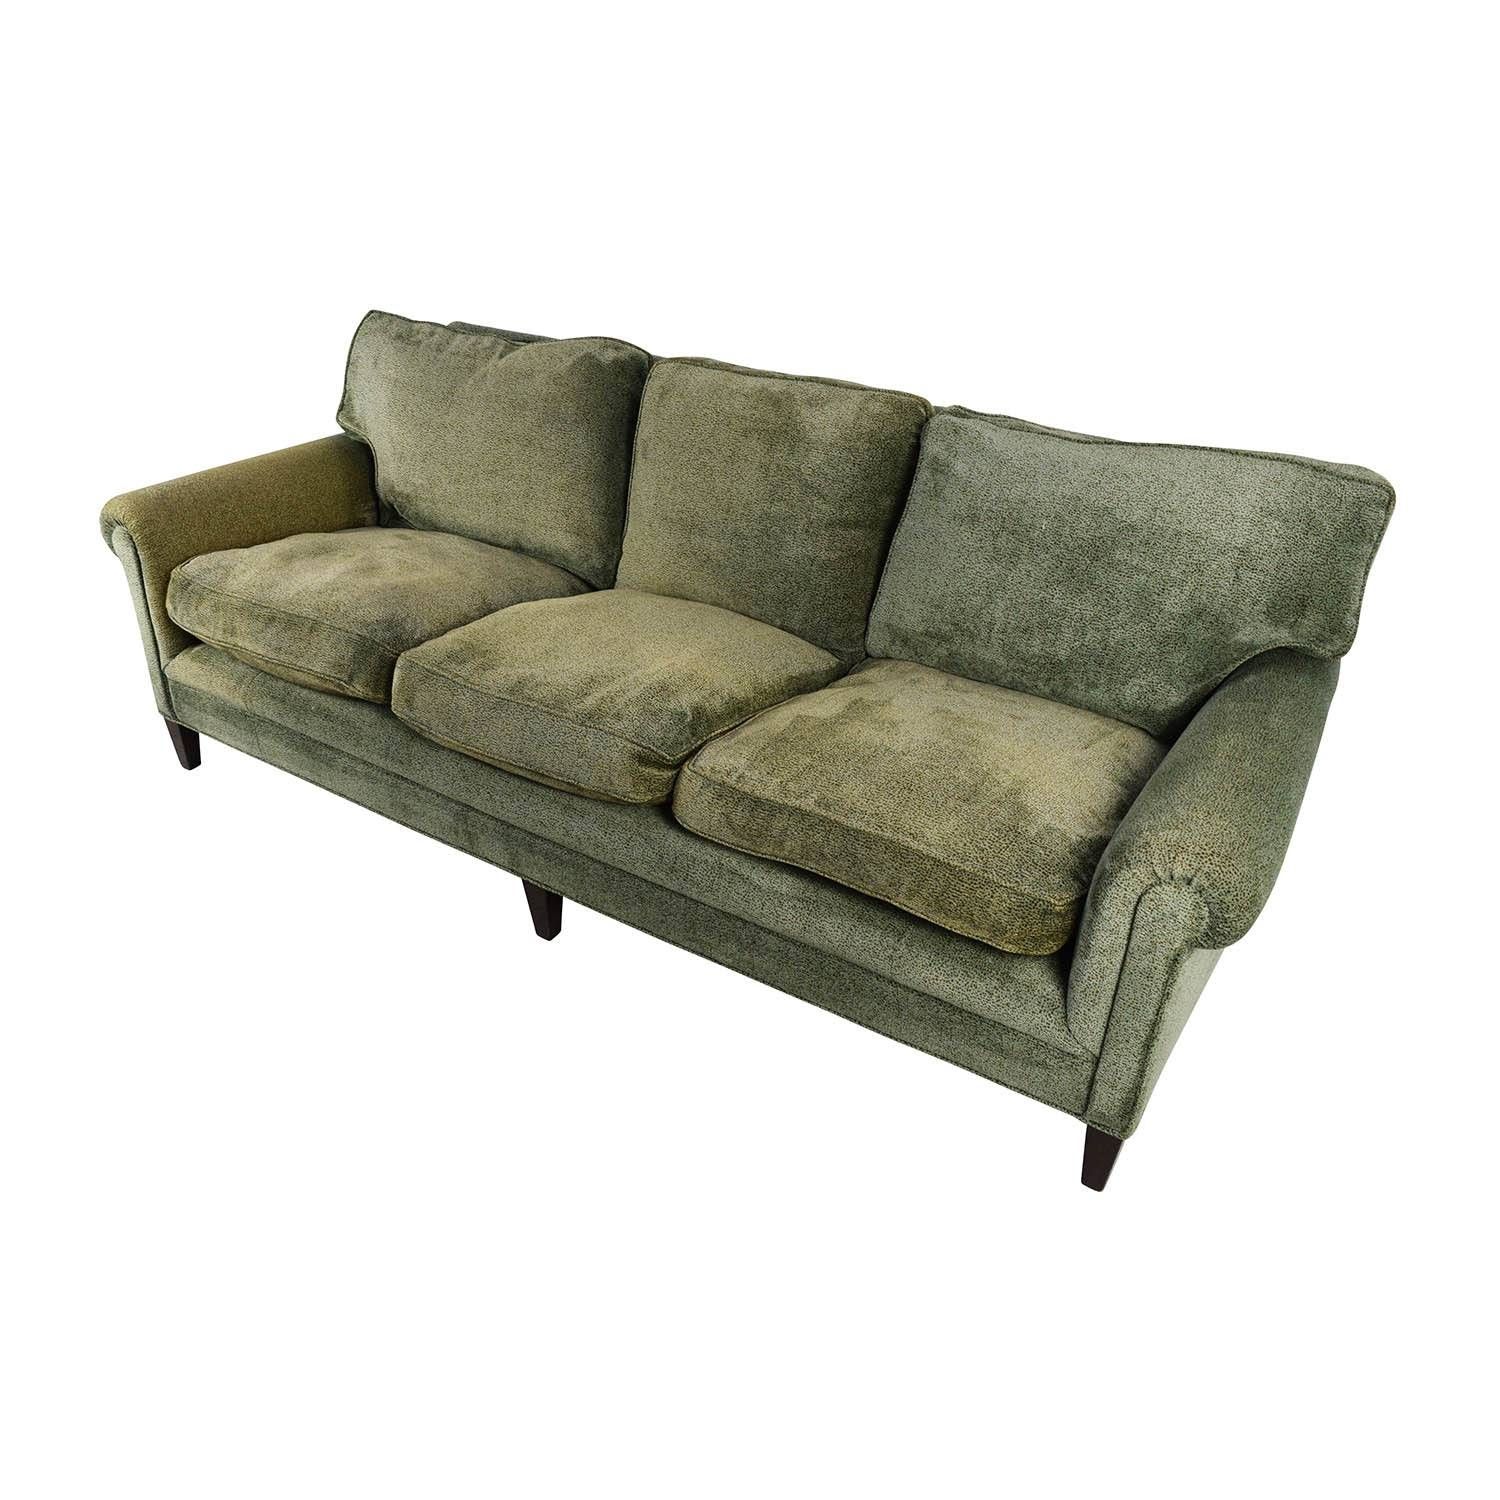 89% Off – George Smith George Smith Classic English Style Sofa / Sofas For Classic English Sofas (View 24 of 30)